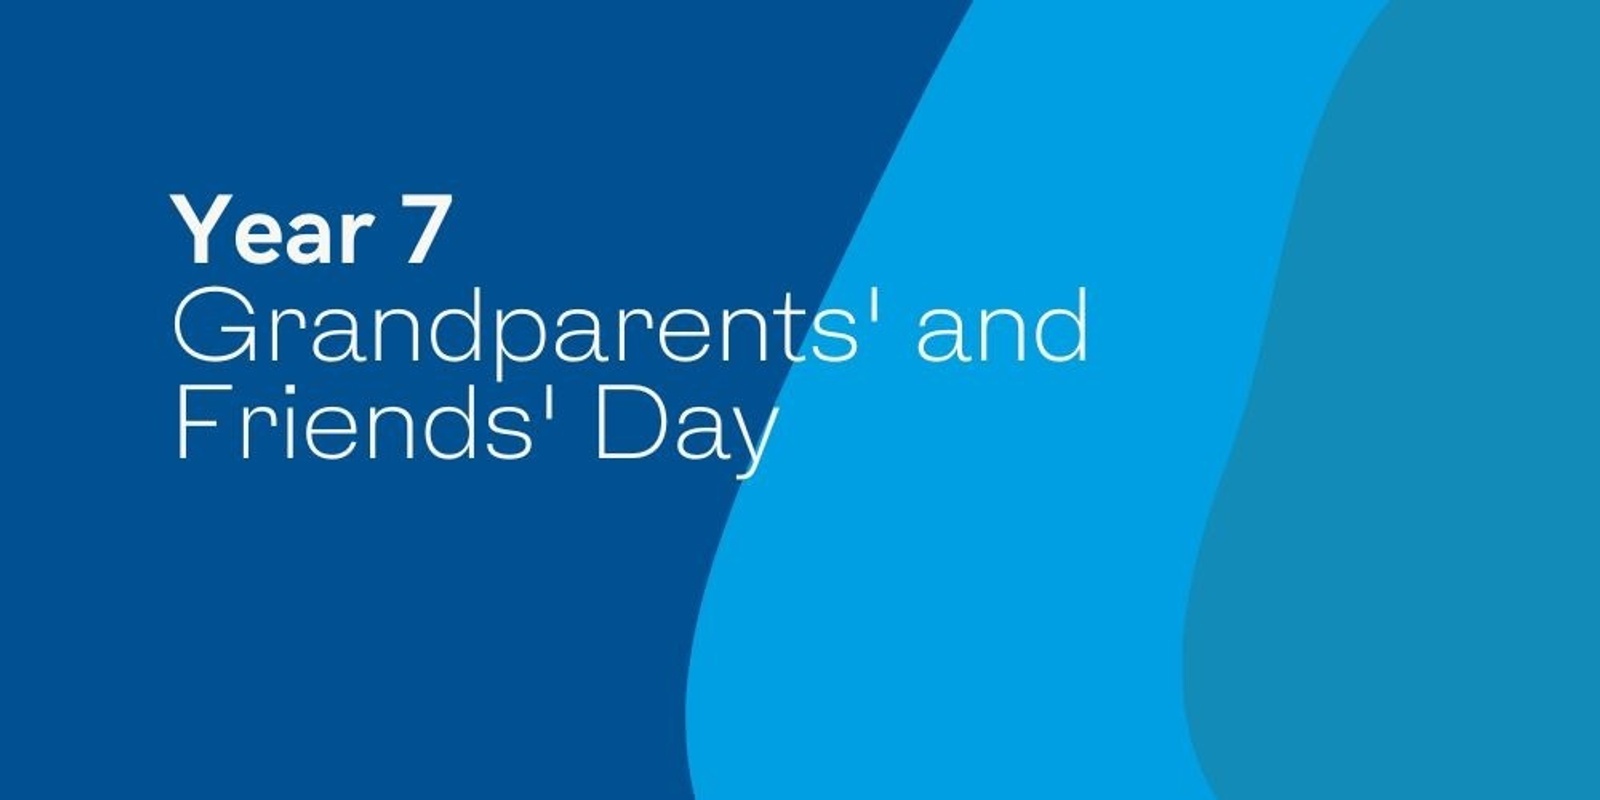 Banner image for Year 7 Grandparents' and Friends' Day